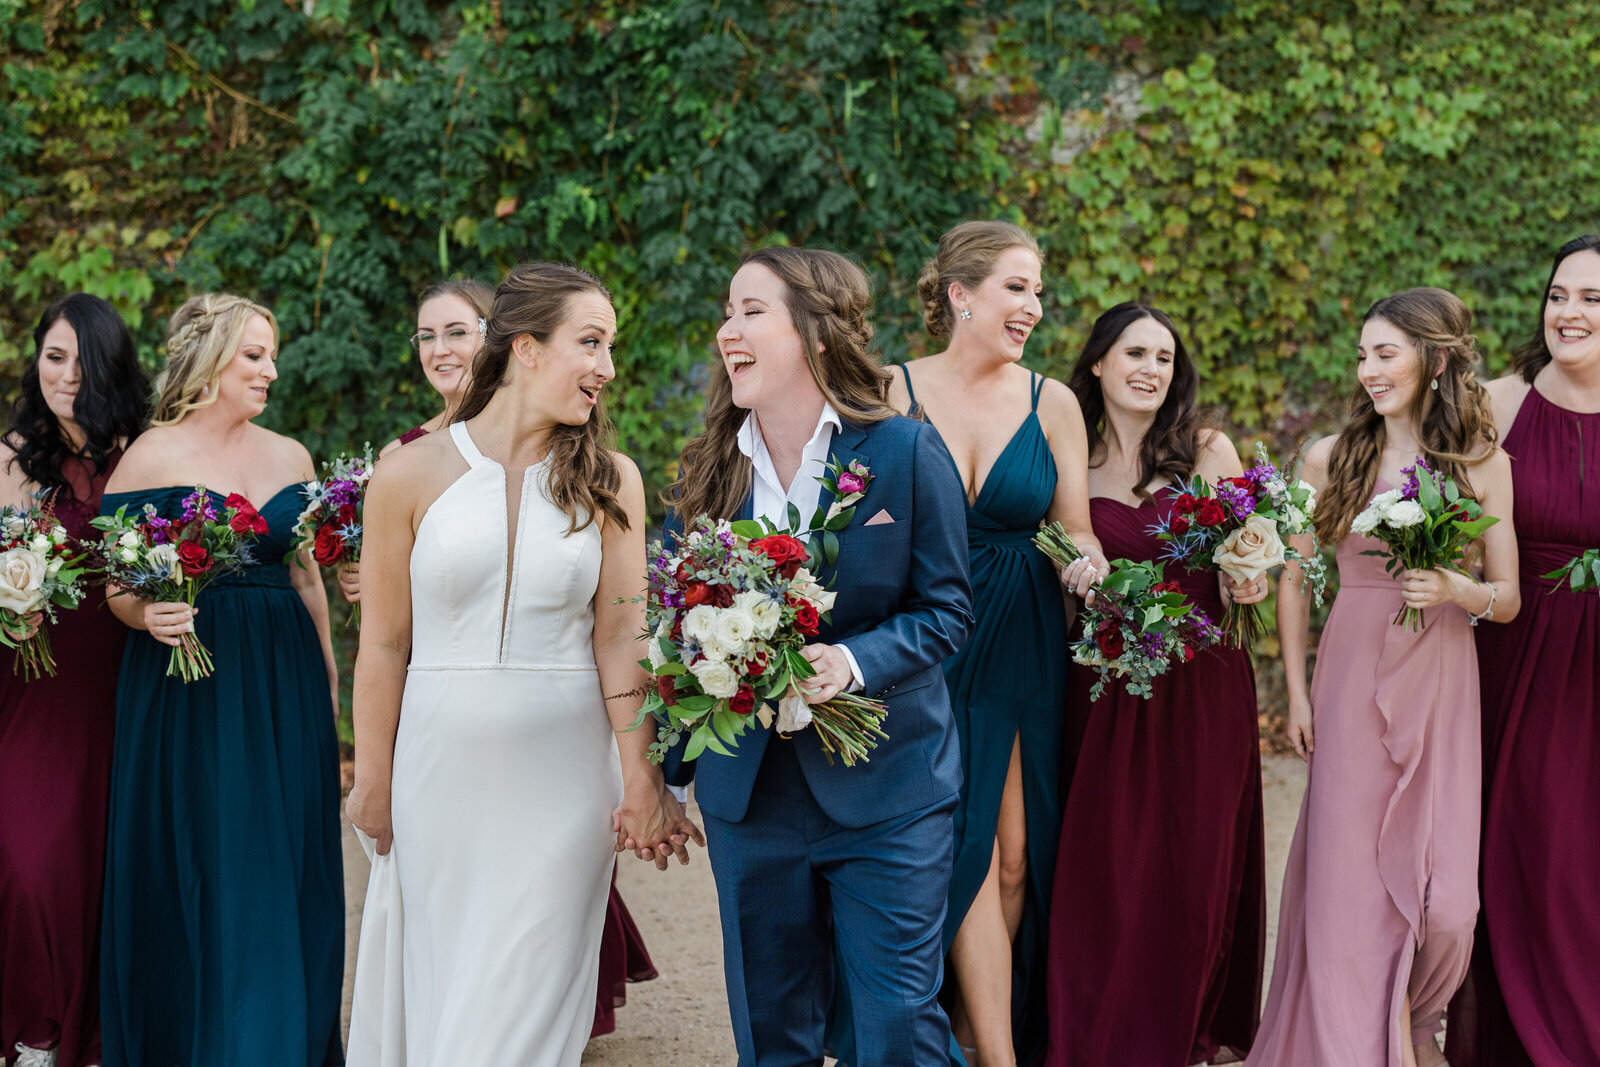 Two looking at each other and laughing with their large wedding party outside of the Brik Venue in Fort Worth, Texas. The bride on the left is wearing a sleeveless, white dress while the bride on the right is wearing a blue suit and is holding a bouquet. The wedding party is wearing dresses of blue, burgundy, or pink and are all holding bouquets in front of lots of greenery.